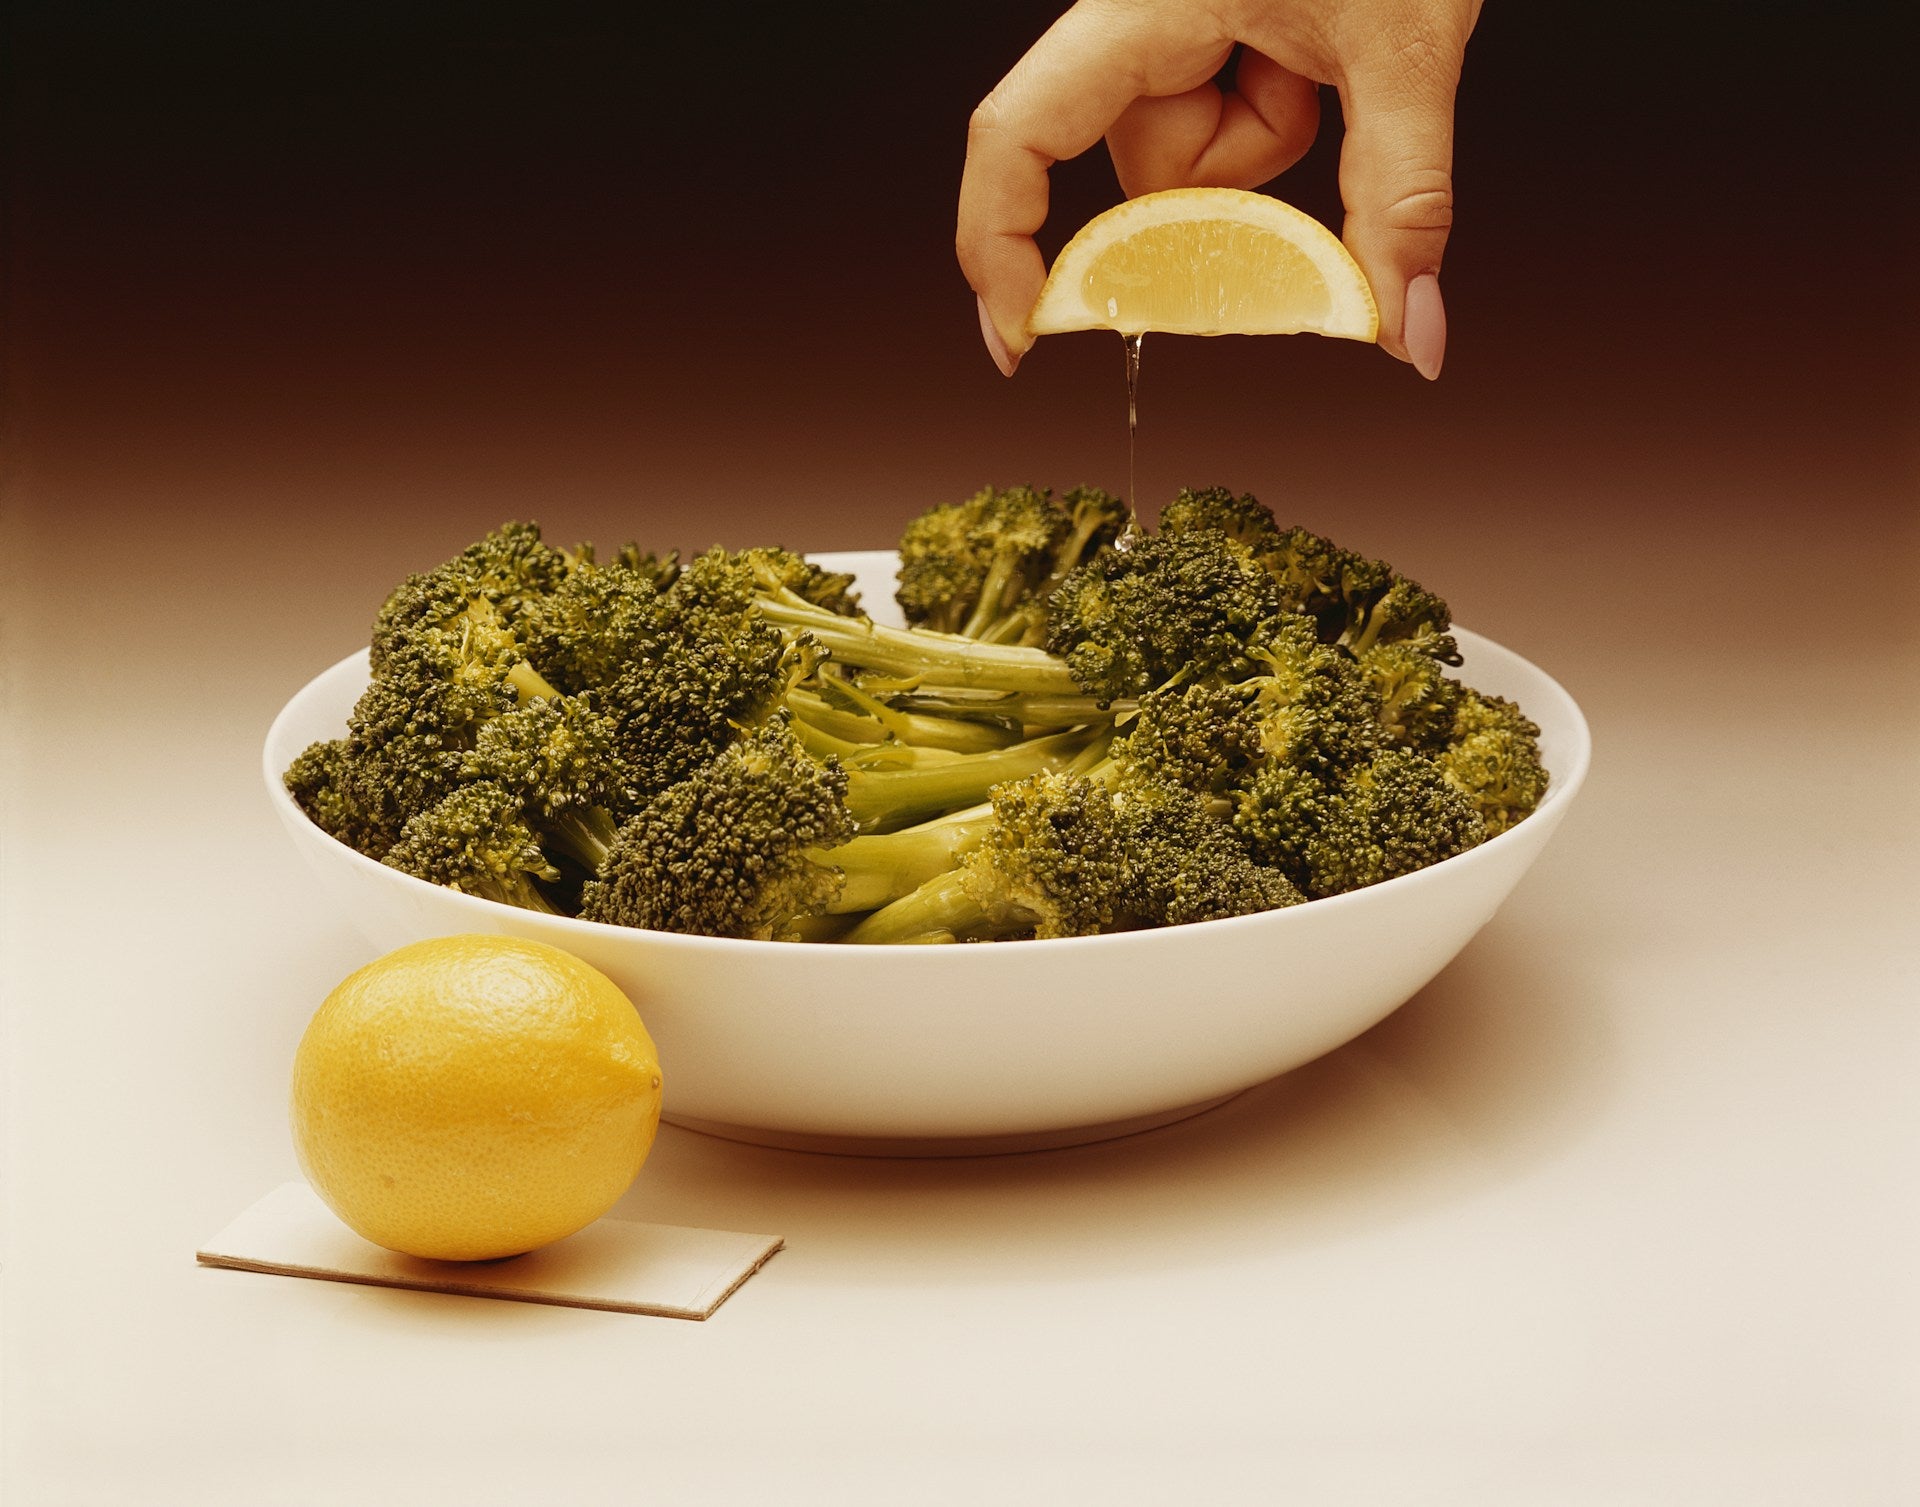 On display is broccoli, of the variety Di Cicco. There is a heaping serving of broccoli spears, laid flat within a white circular serving bowl. The broccoli spears are aligned so their opposing heads gather at the both the right and left sides of the bowl.  In the center, only the spears are visible.  There is an intact lemon resting against the bowl on front left.  A woman's hand is seen descending from the top, squeezing a wedge of lemon juice onto the broccoli.